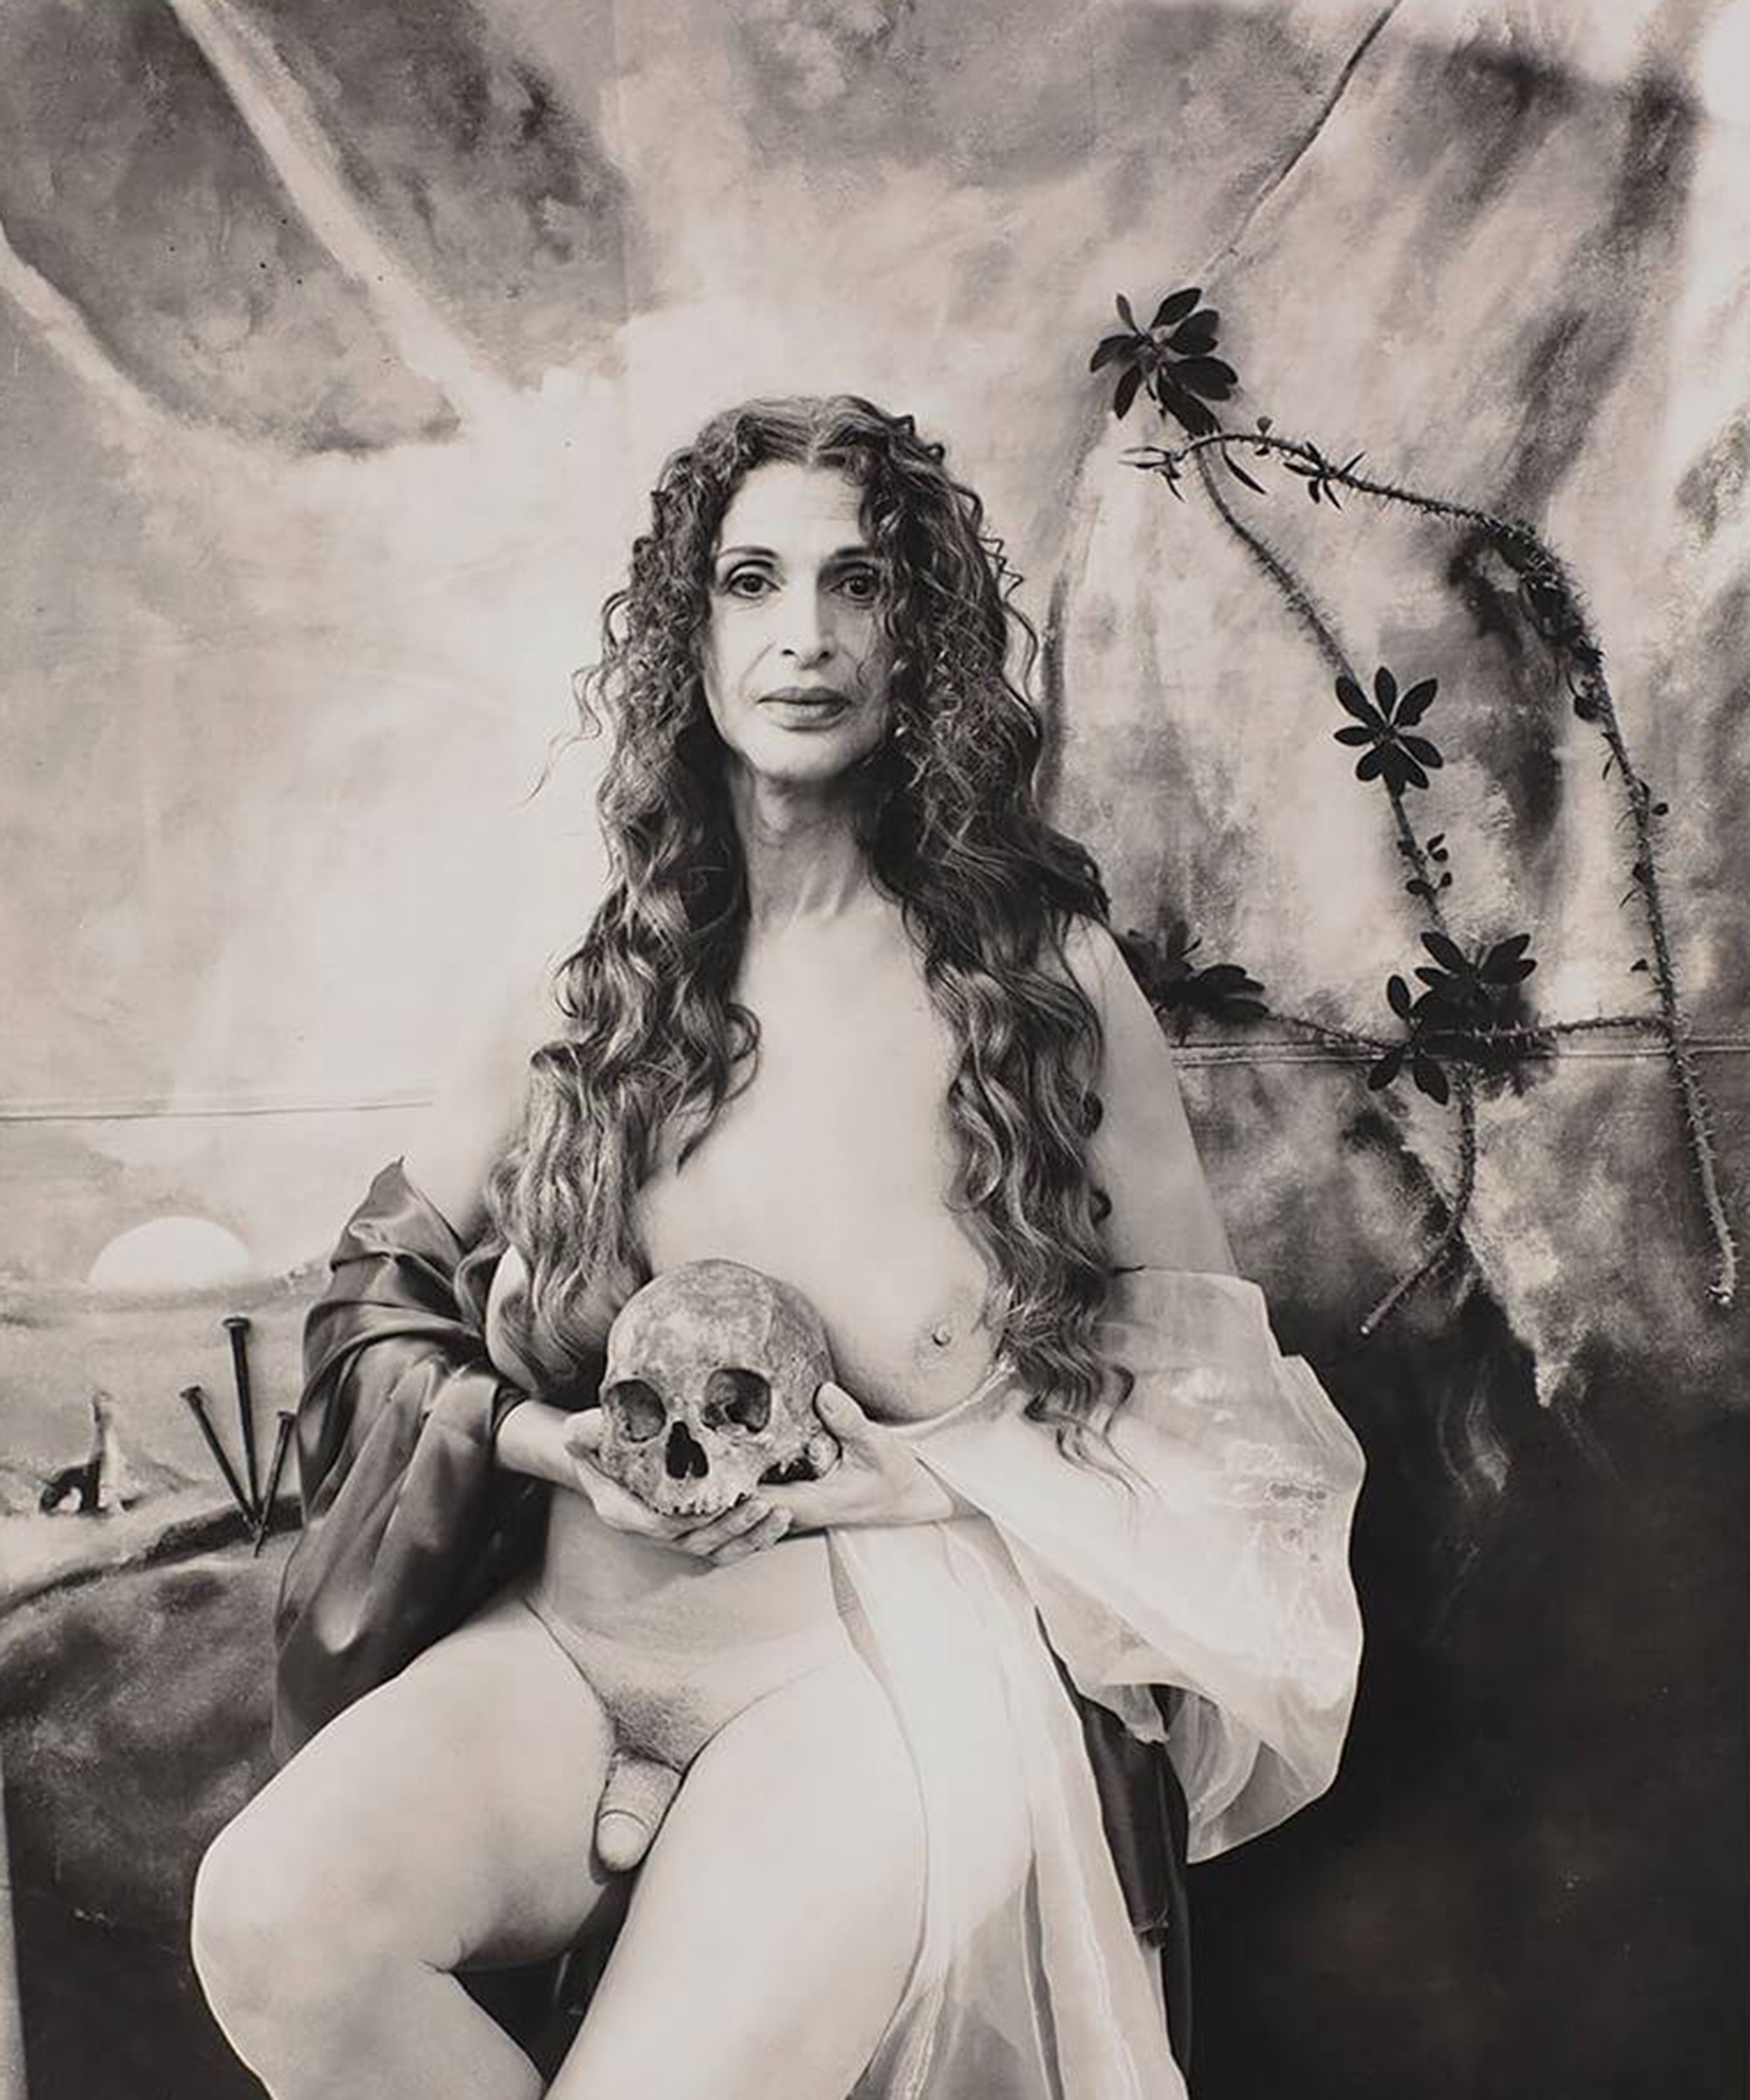 The Soul has no gender, 2016 © Joel-Peter Witkin | Image source internet